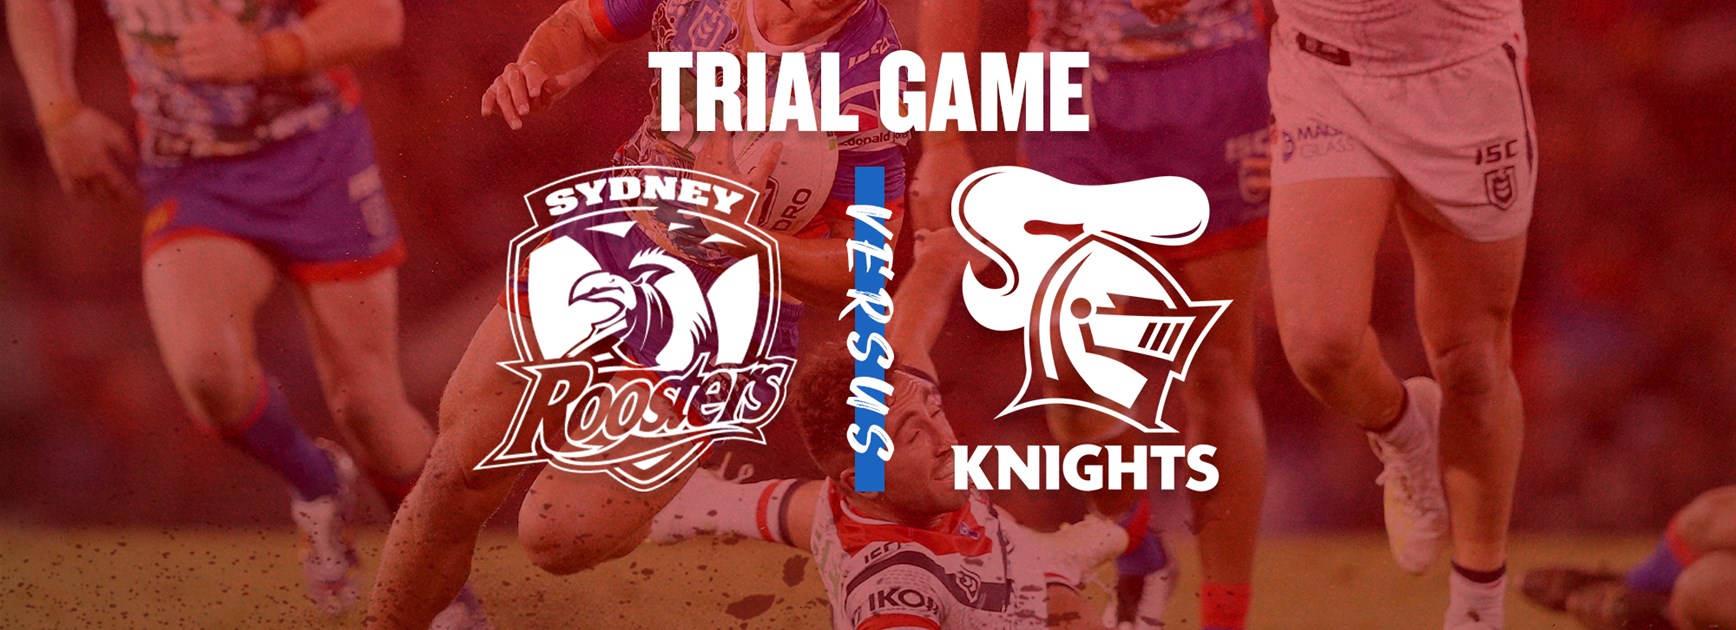 Knights face Roosters in Central Coast trial